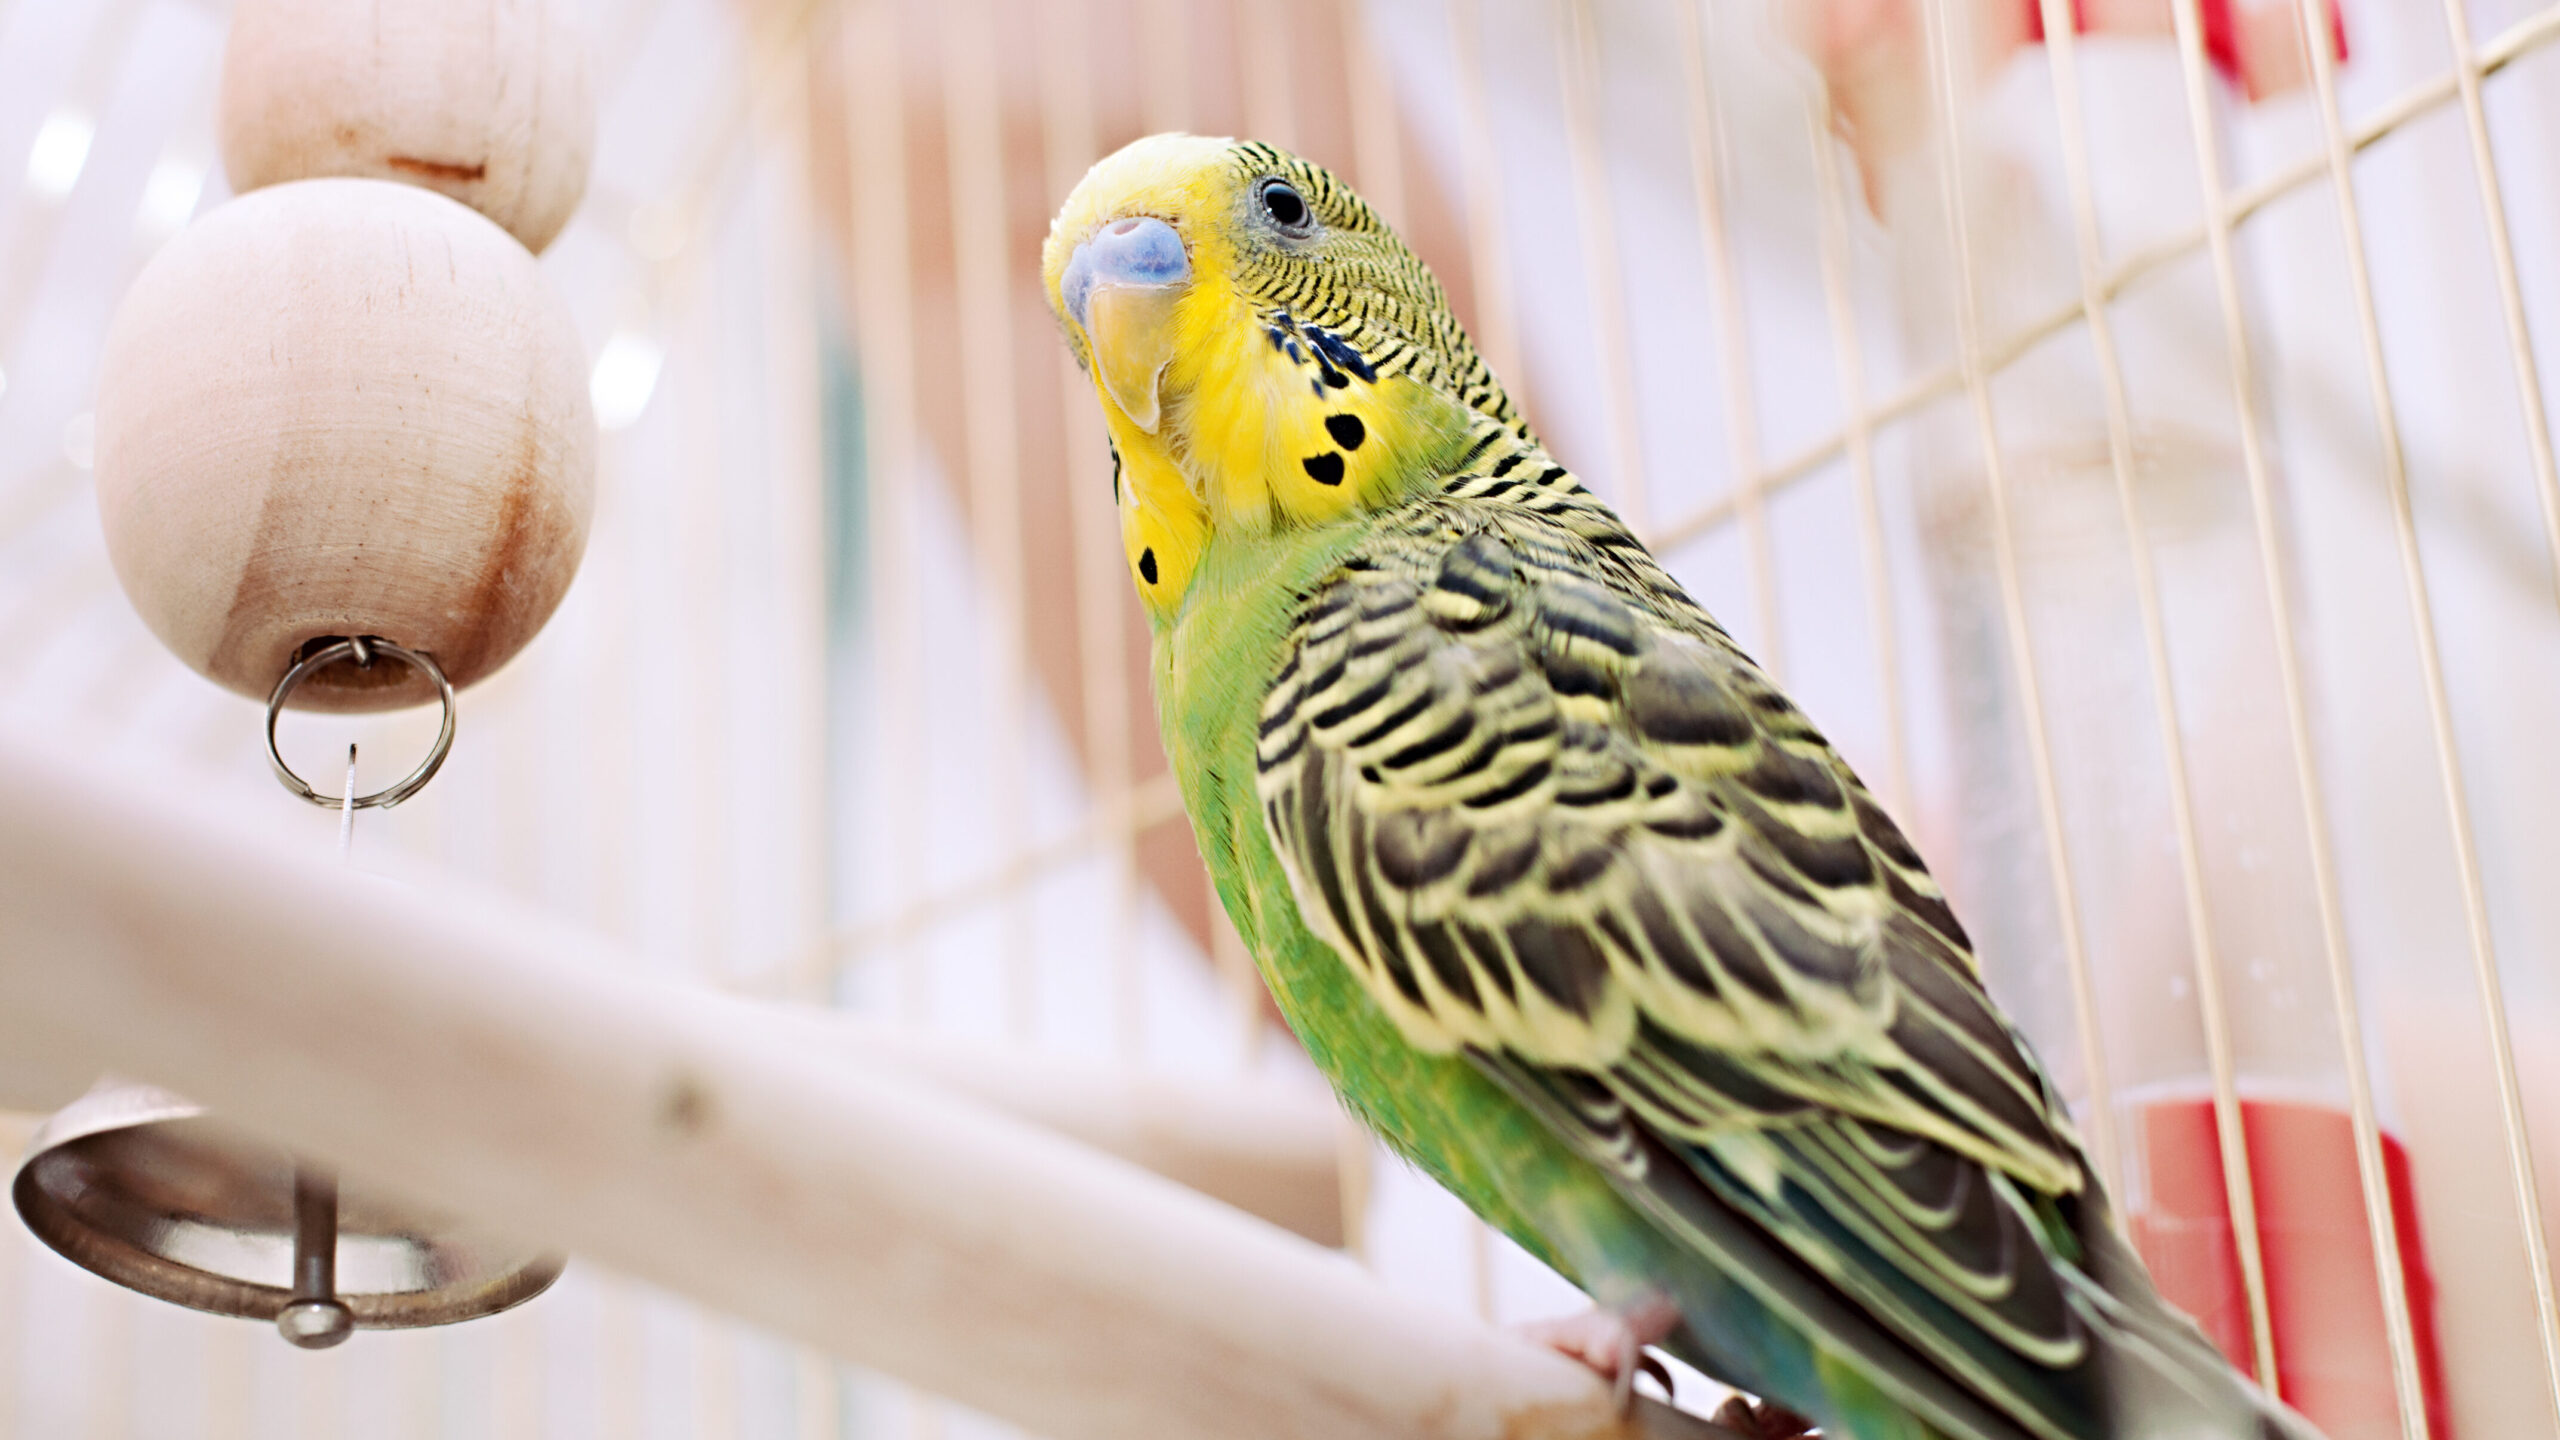 Learn more about some steps you can follow to help in potty training your pet bird and avoid messes in your home!